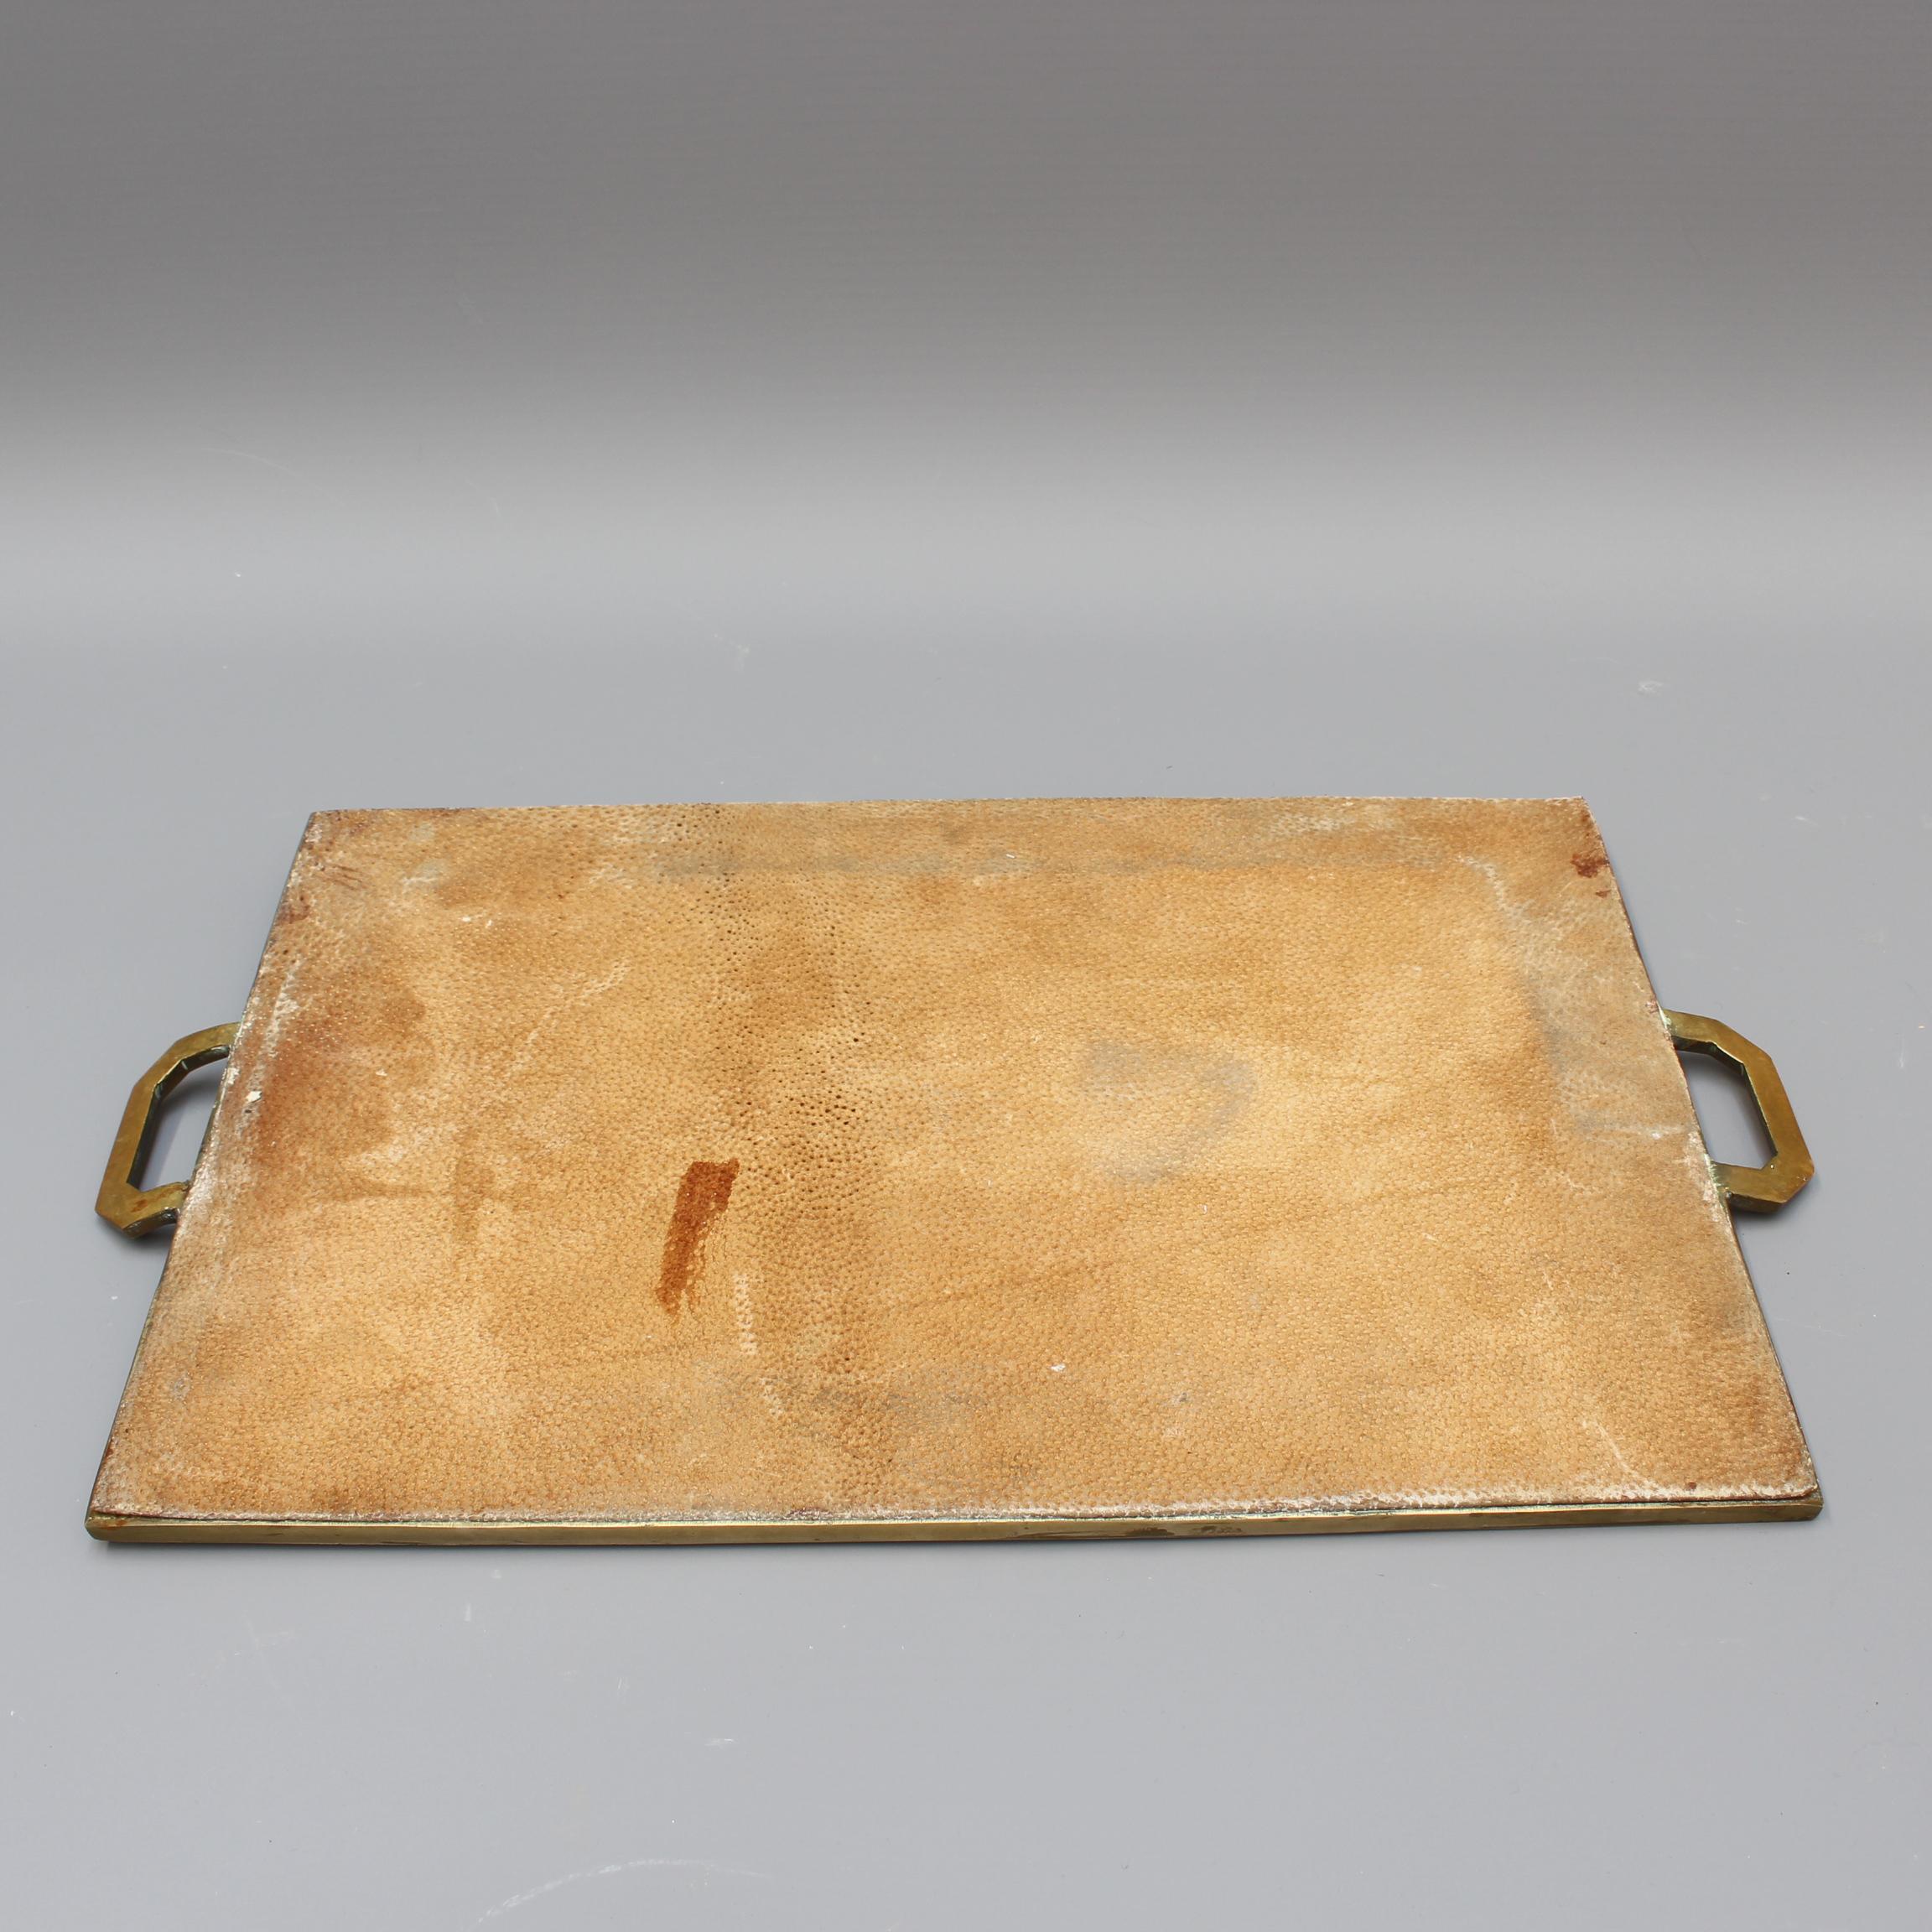 Late 20th Century Aluminium and Brass Brutalist Style Serving Tray by David Marshall, circa 1970s